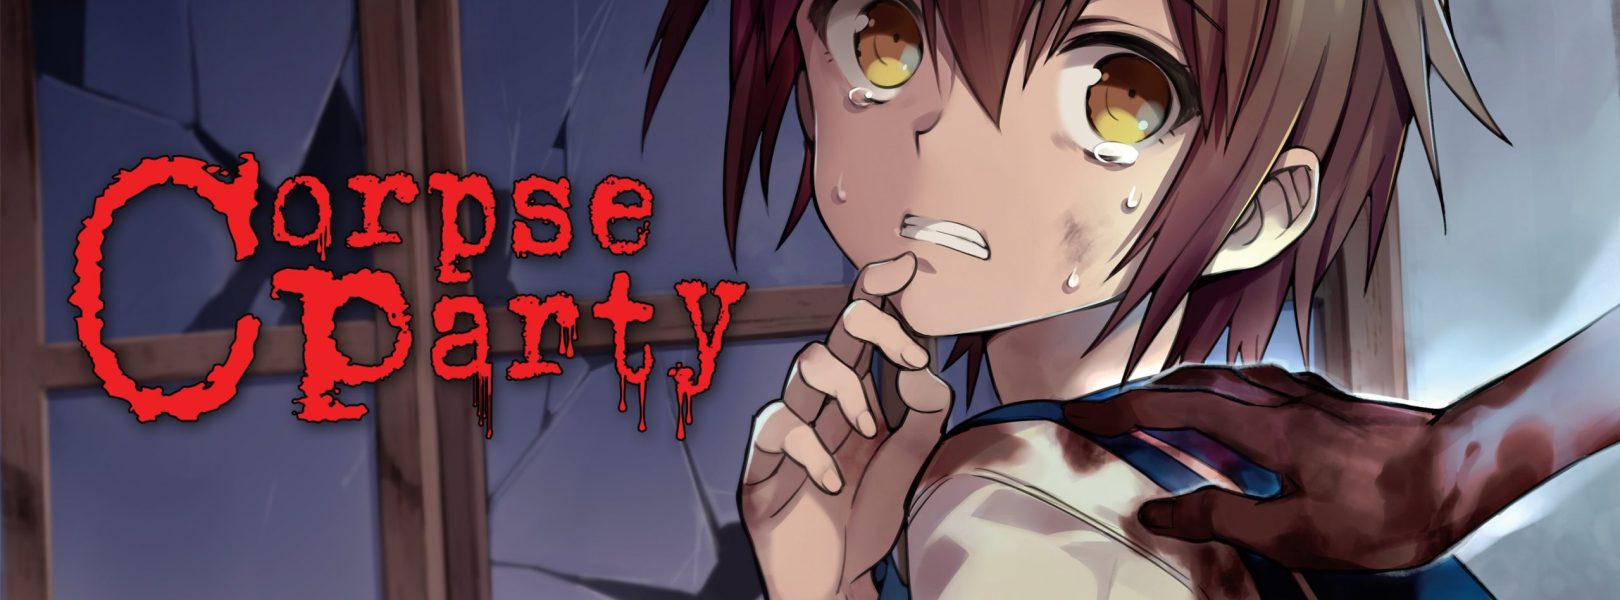 corpse party – Capsule Computers